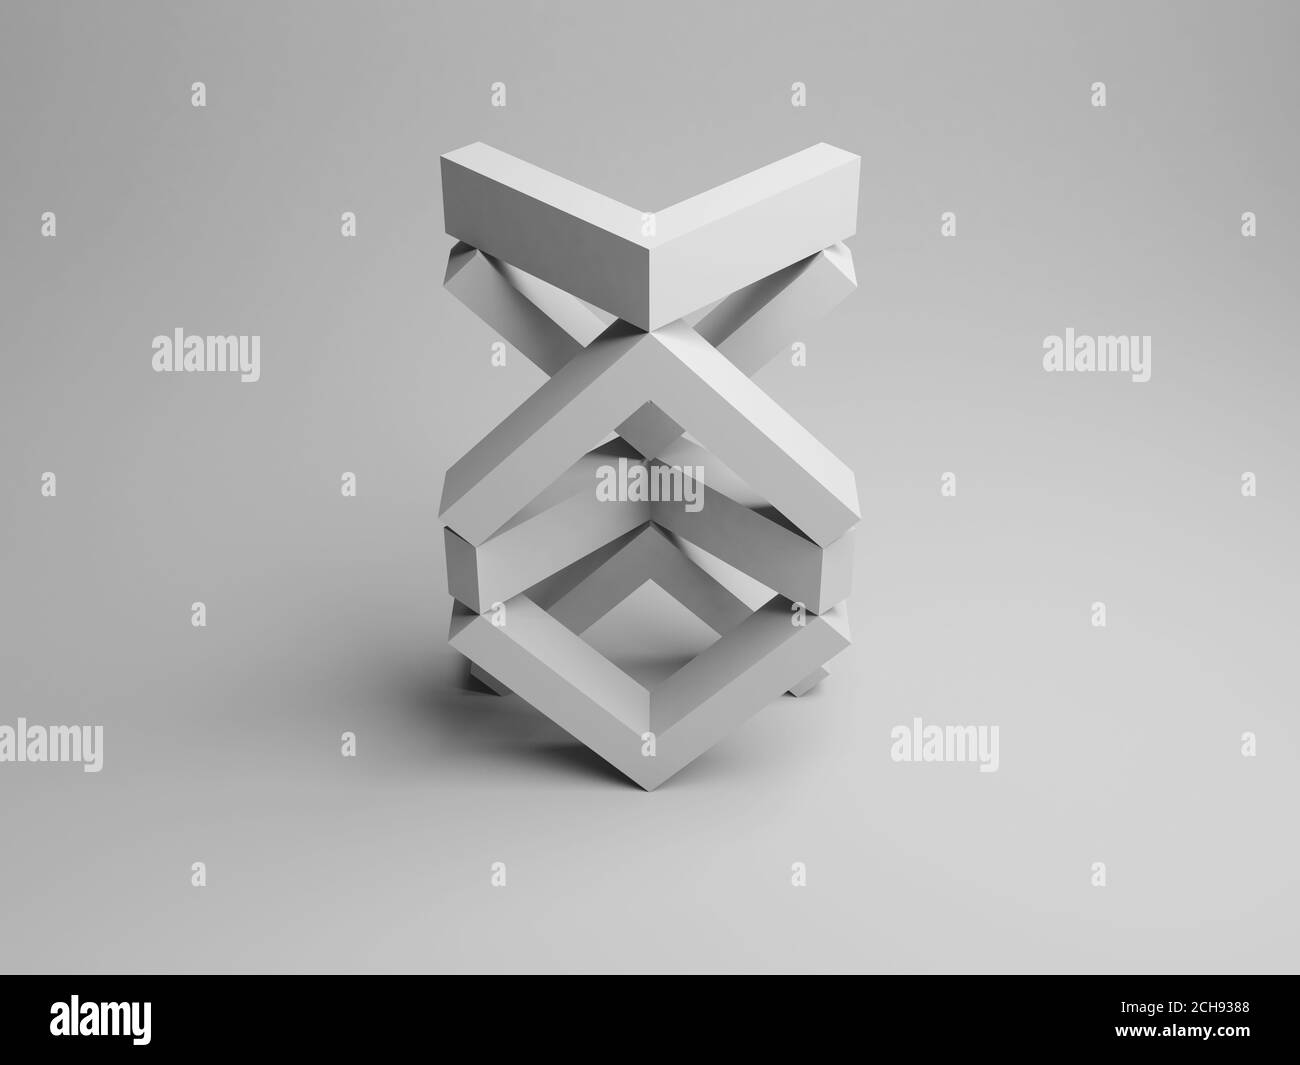 Abstract white equilibrium still life installation with tower of balancing corners standing on light gray background. 3d rendering illustration Stock Photo